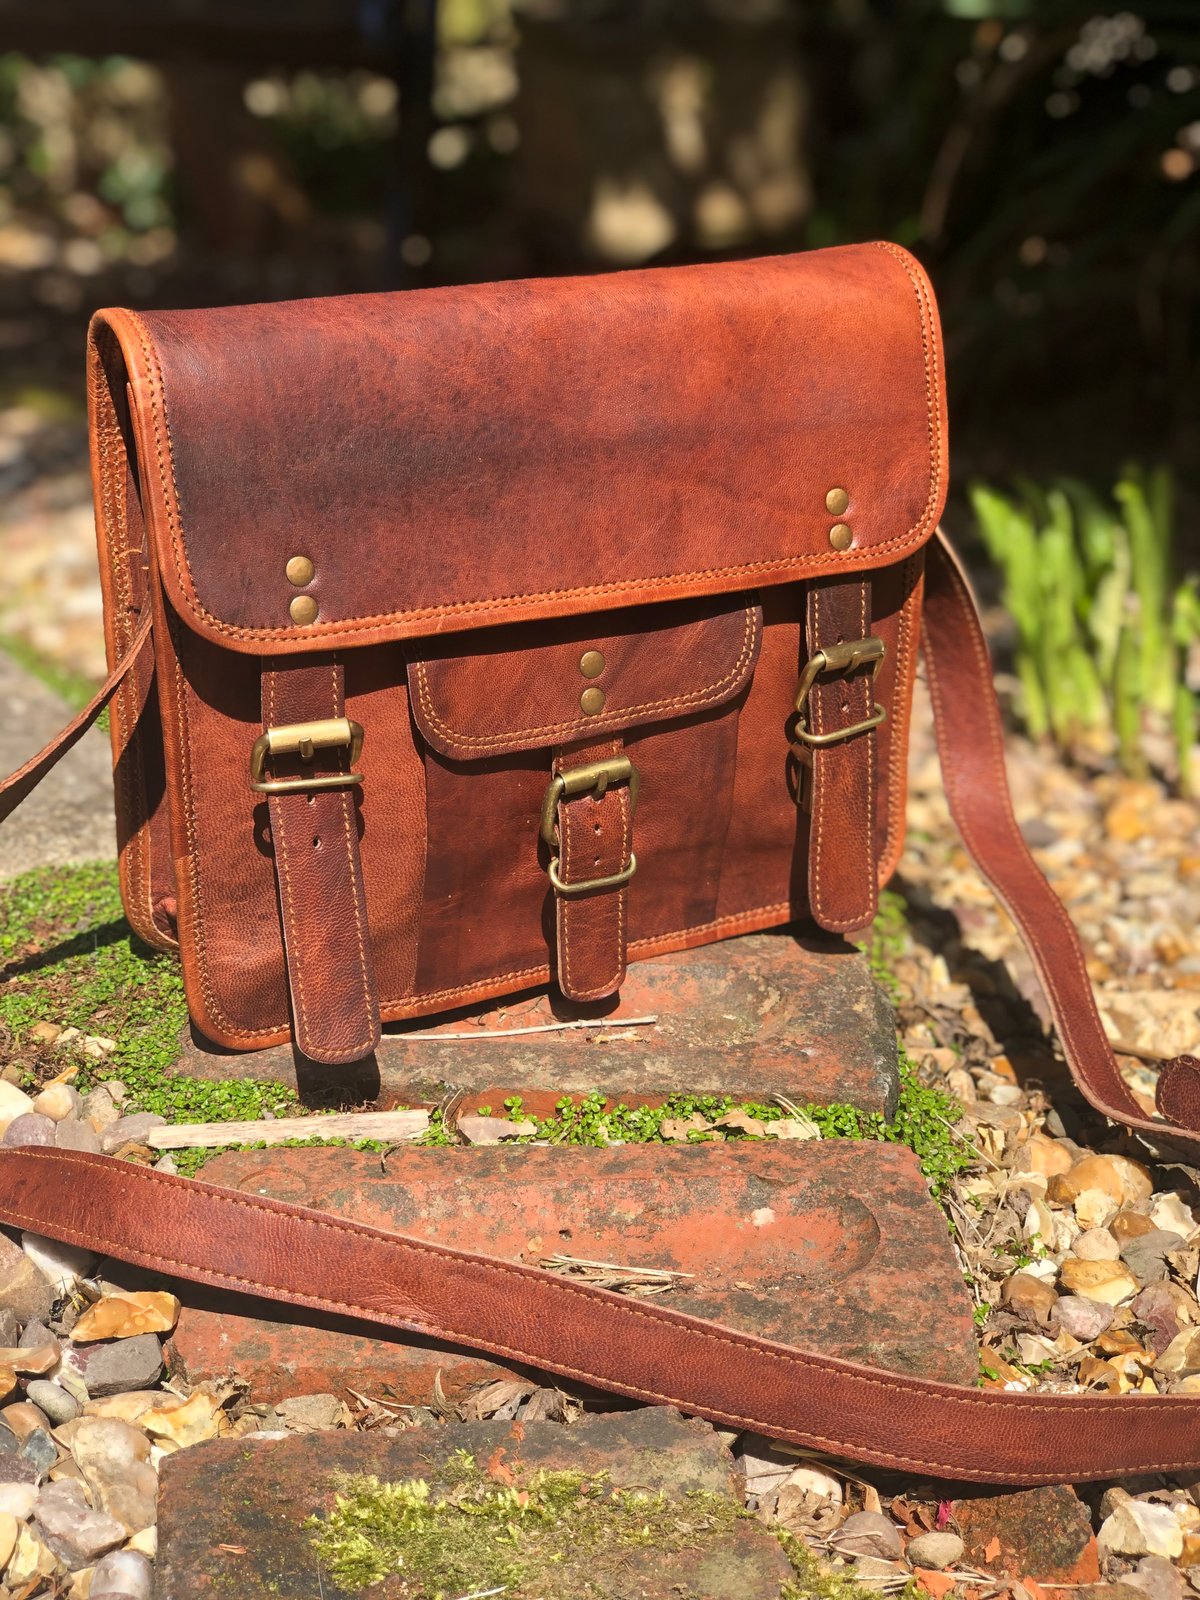 Amazon.com: RUSTIC TOWN Leather Satchel iPad Tablet Bag - Leather Saddle Bag  Purse - Small iPad (Upto 10.5-inch) Shoulder Bag for Men and Women (11  inches, Brown) : Everything Else